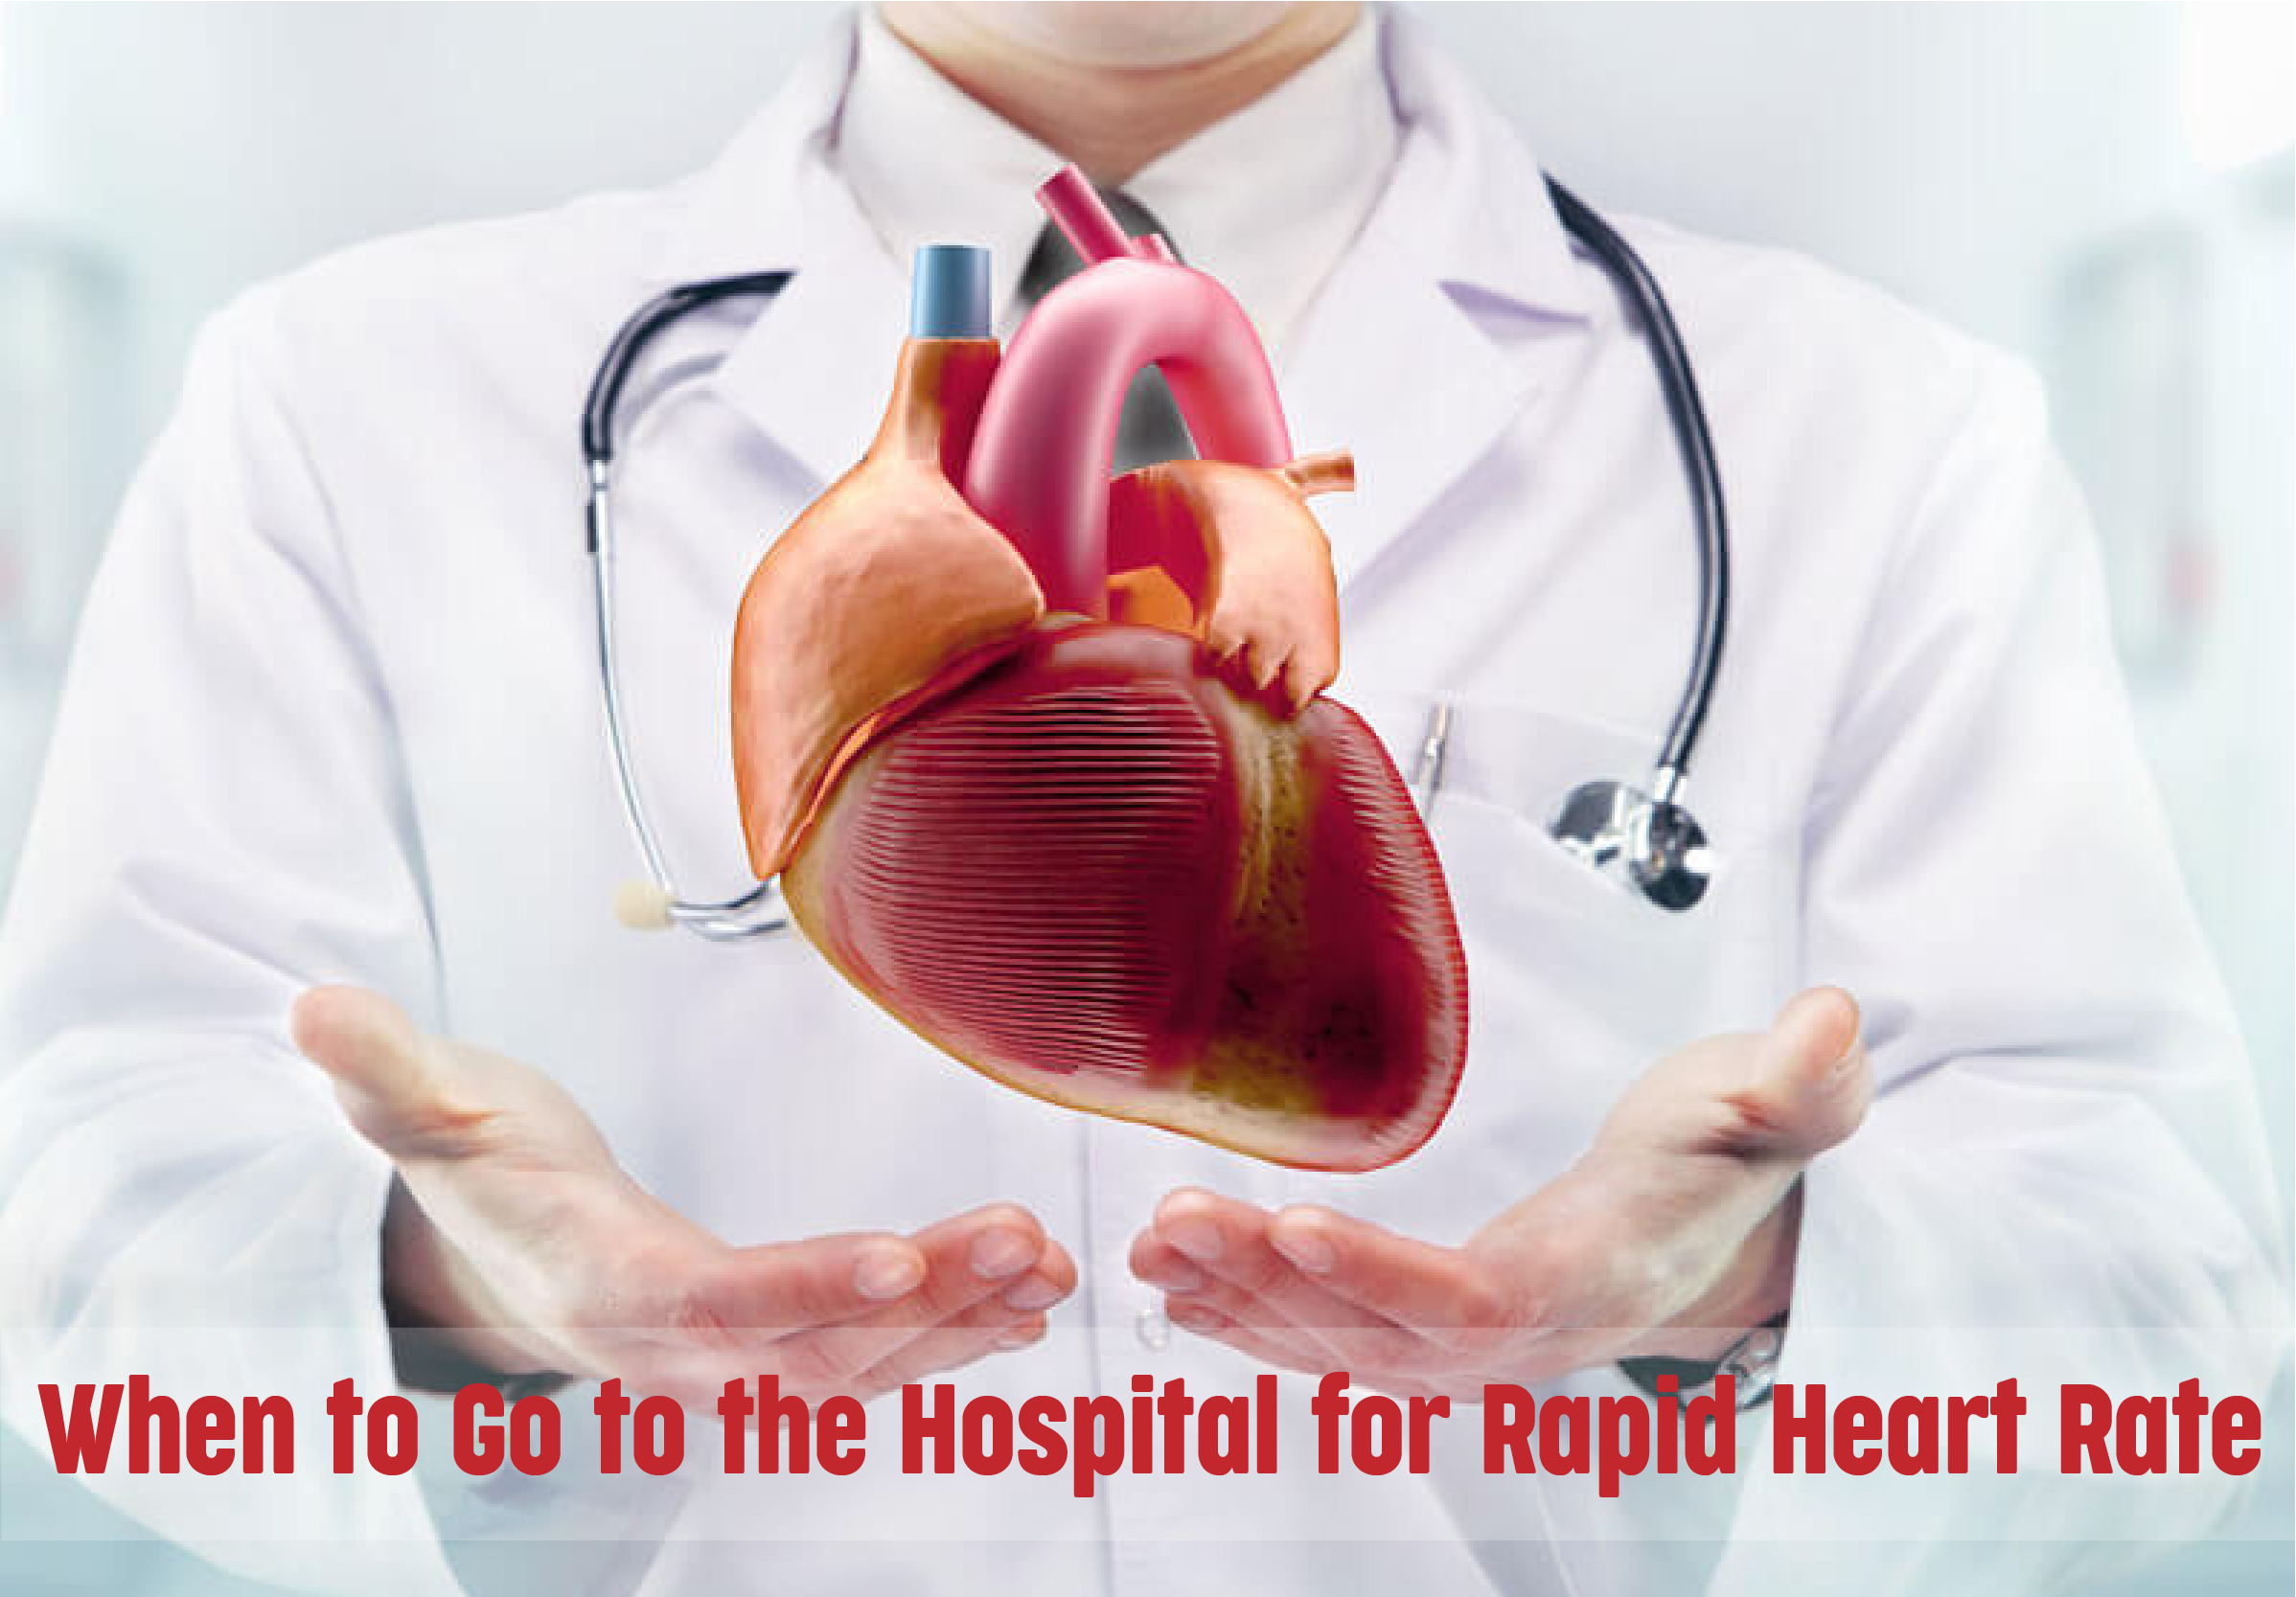 When to Go to the Hospital for Rapid Heart Rate?